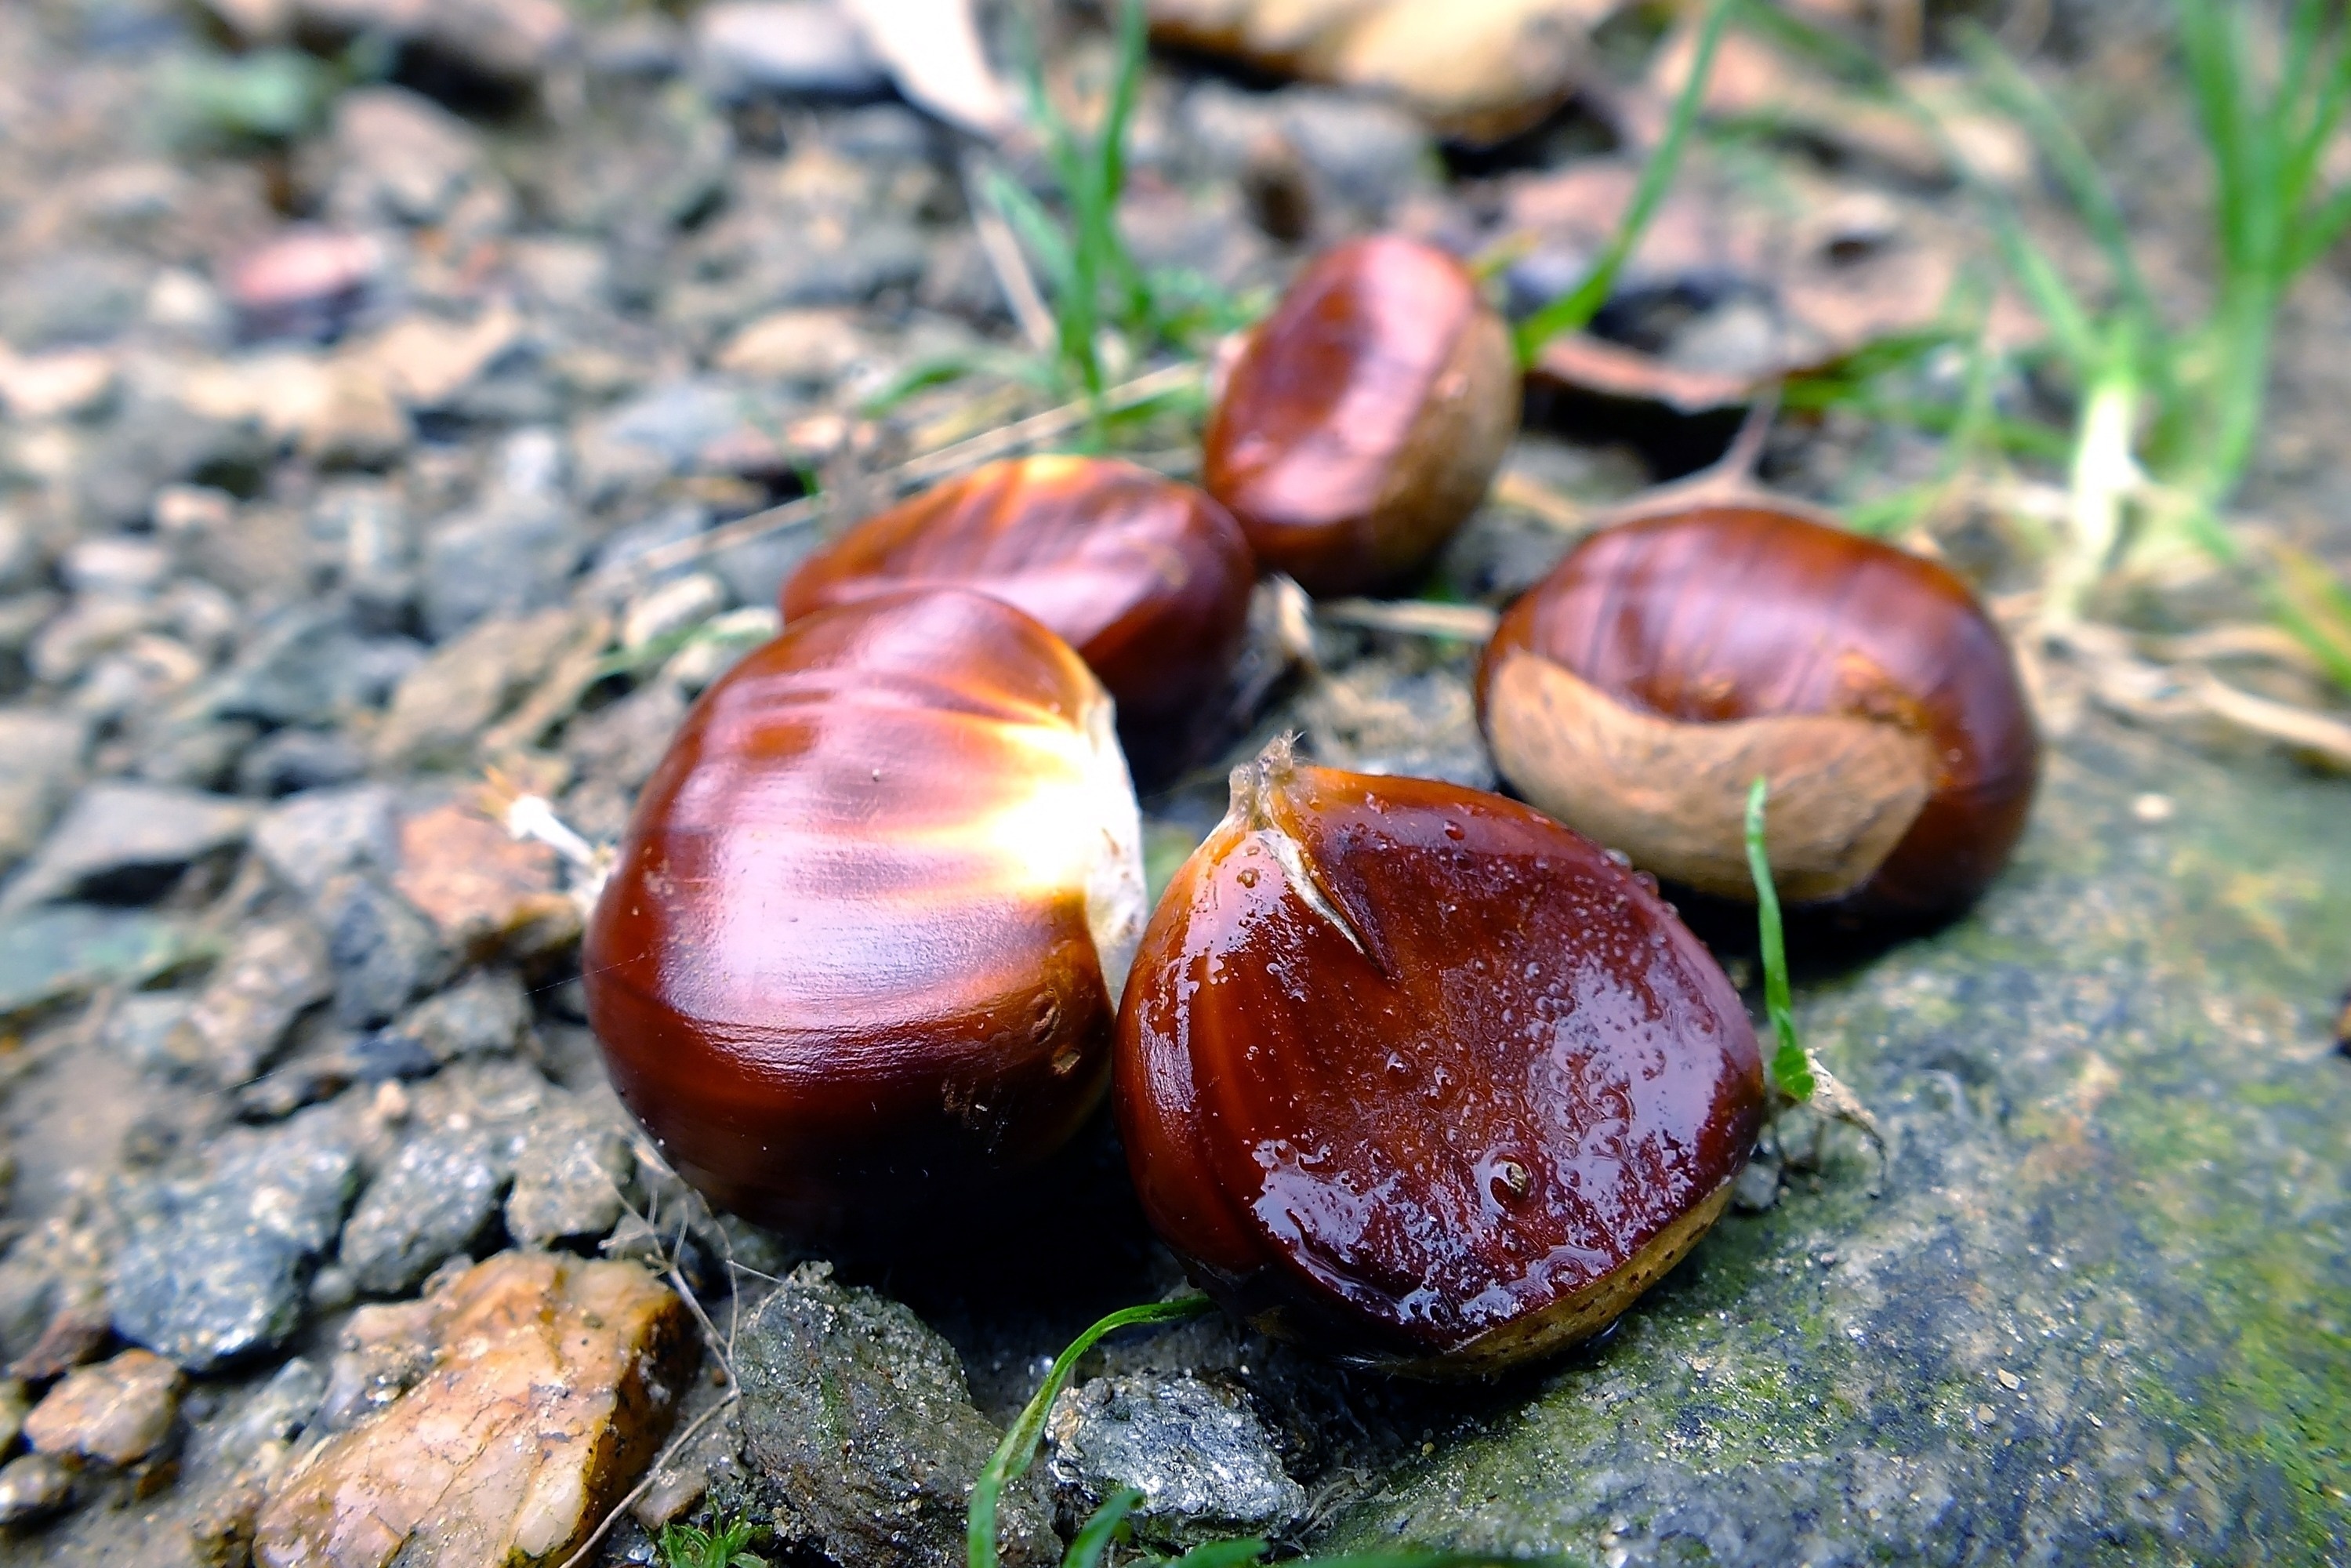 Chestnut on the ground, Natural beauty, Inspiring image, Grounded perspective, 3000x2000 HD Desktop